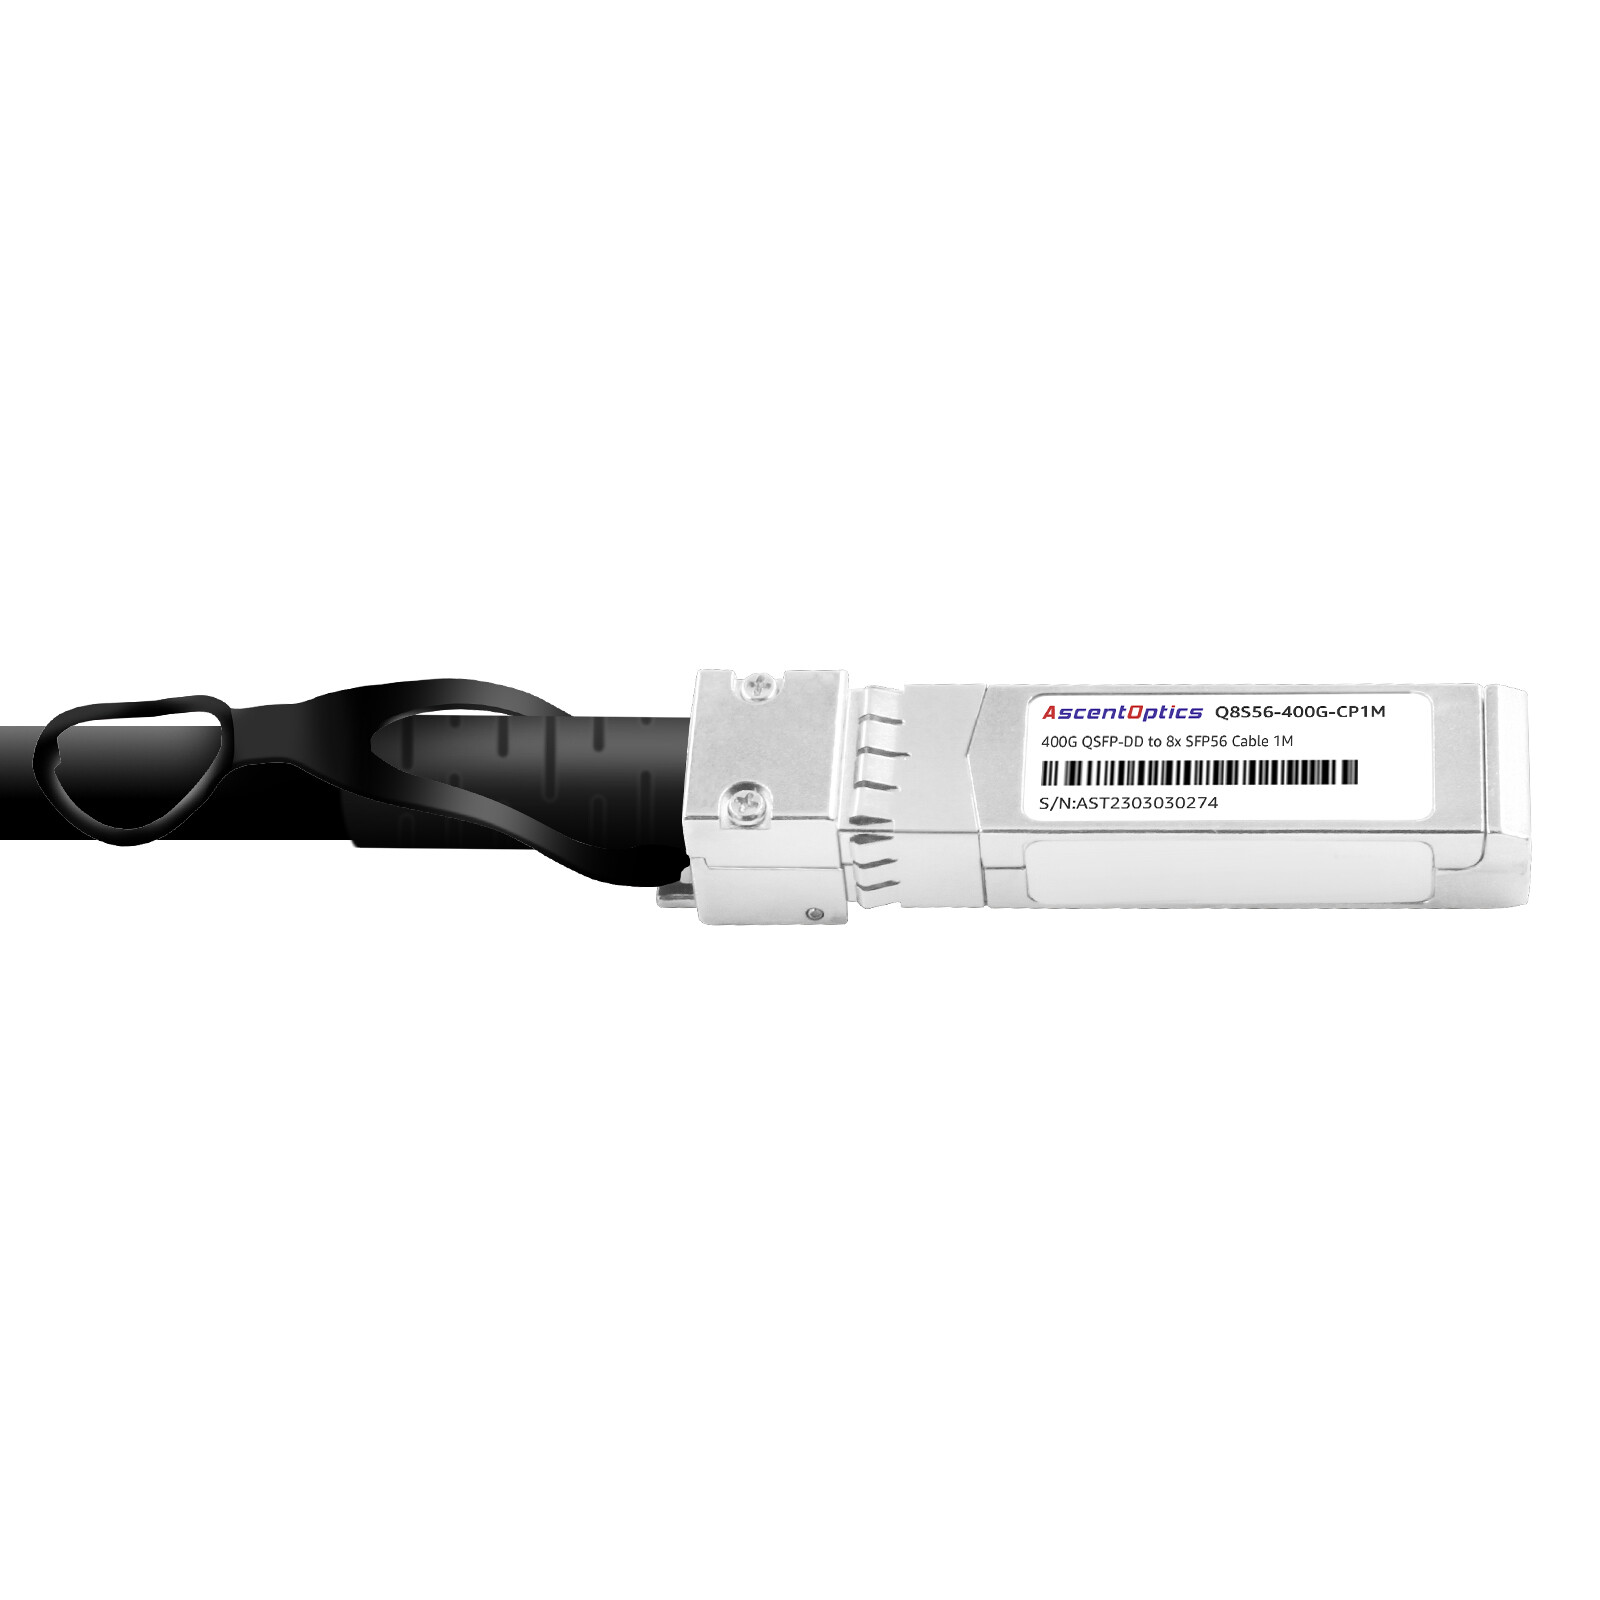 400G QSFP-DD to 8x 50G SFP56 Copper Breakout Cable,1 Meter,Passive